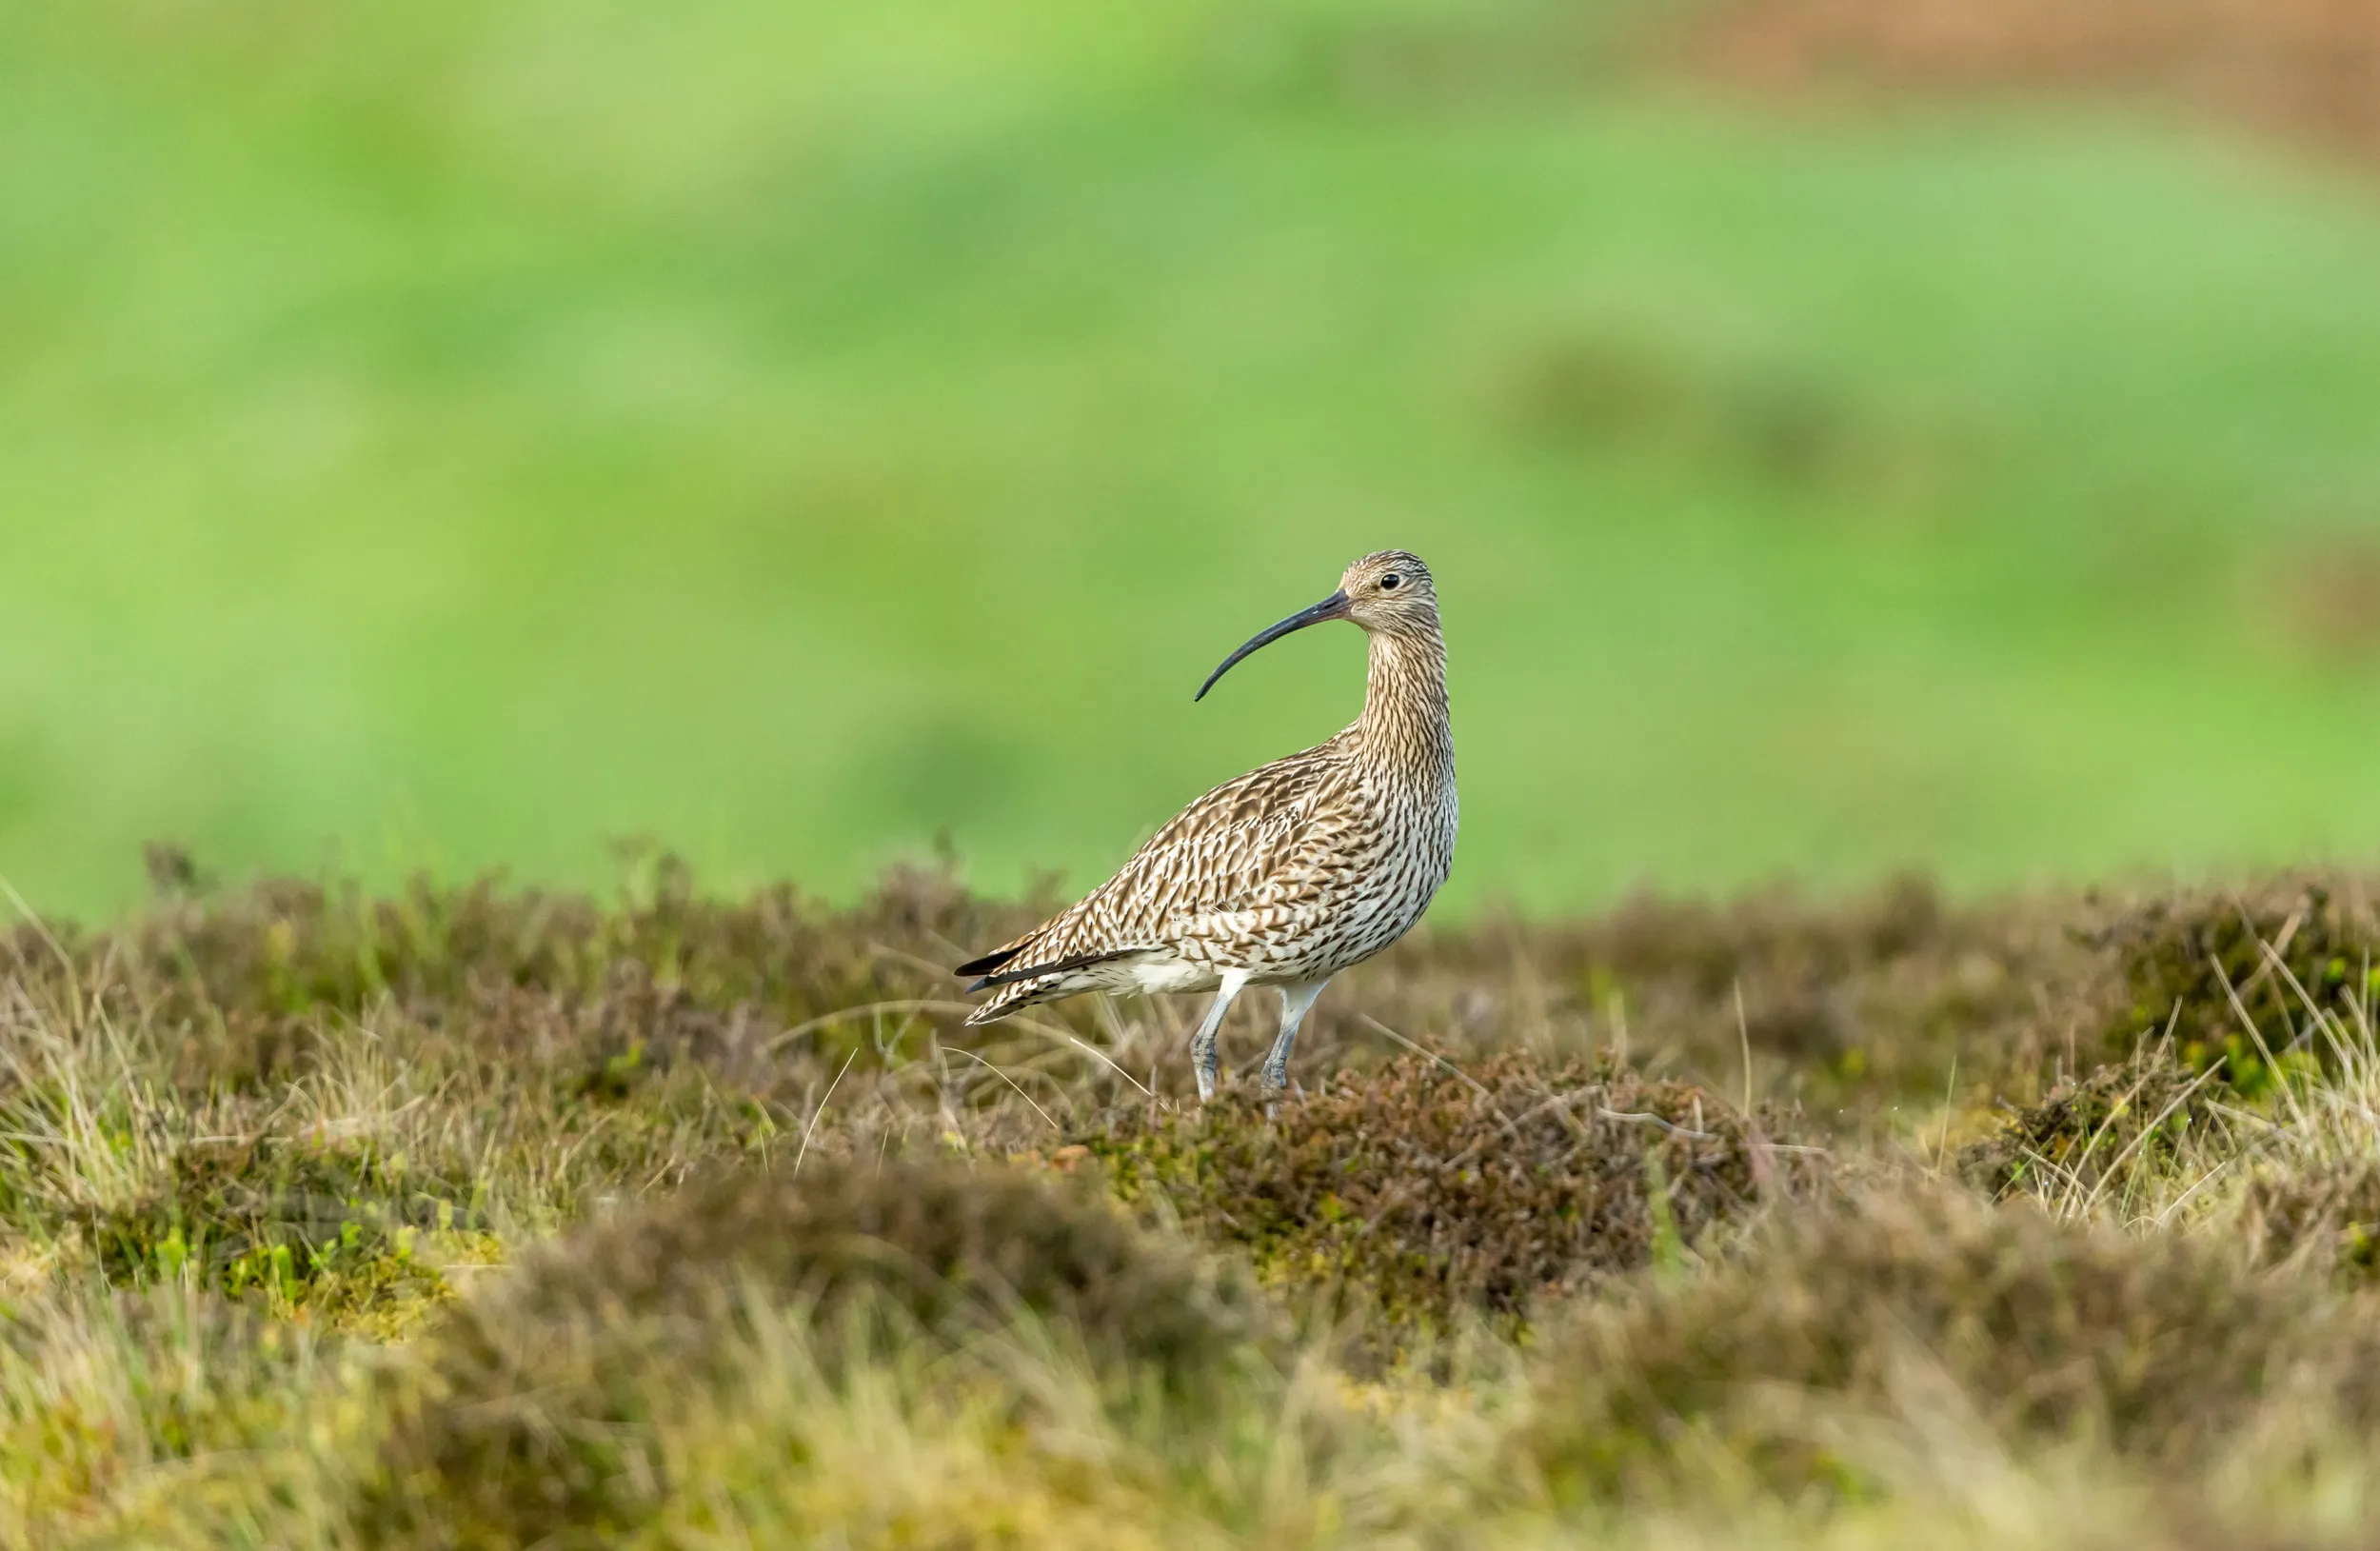 A lone Curlew looking to the side stood in a meadow.